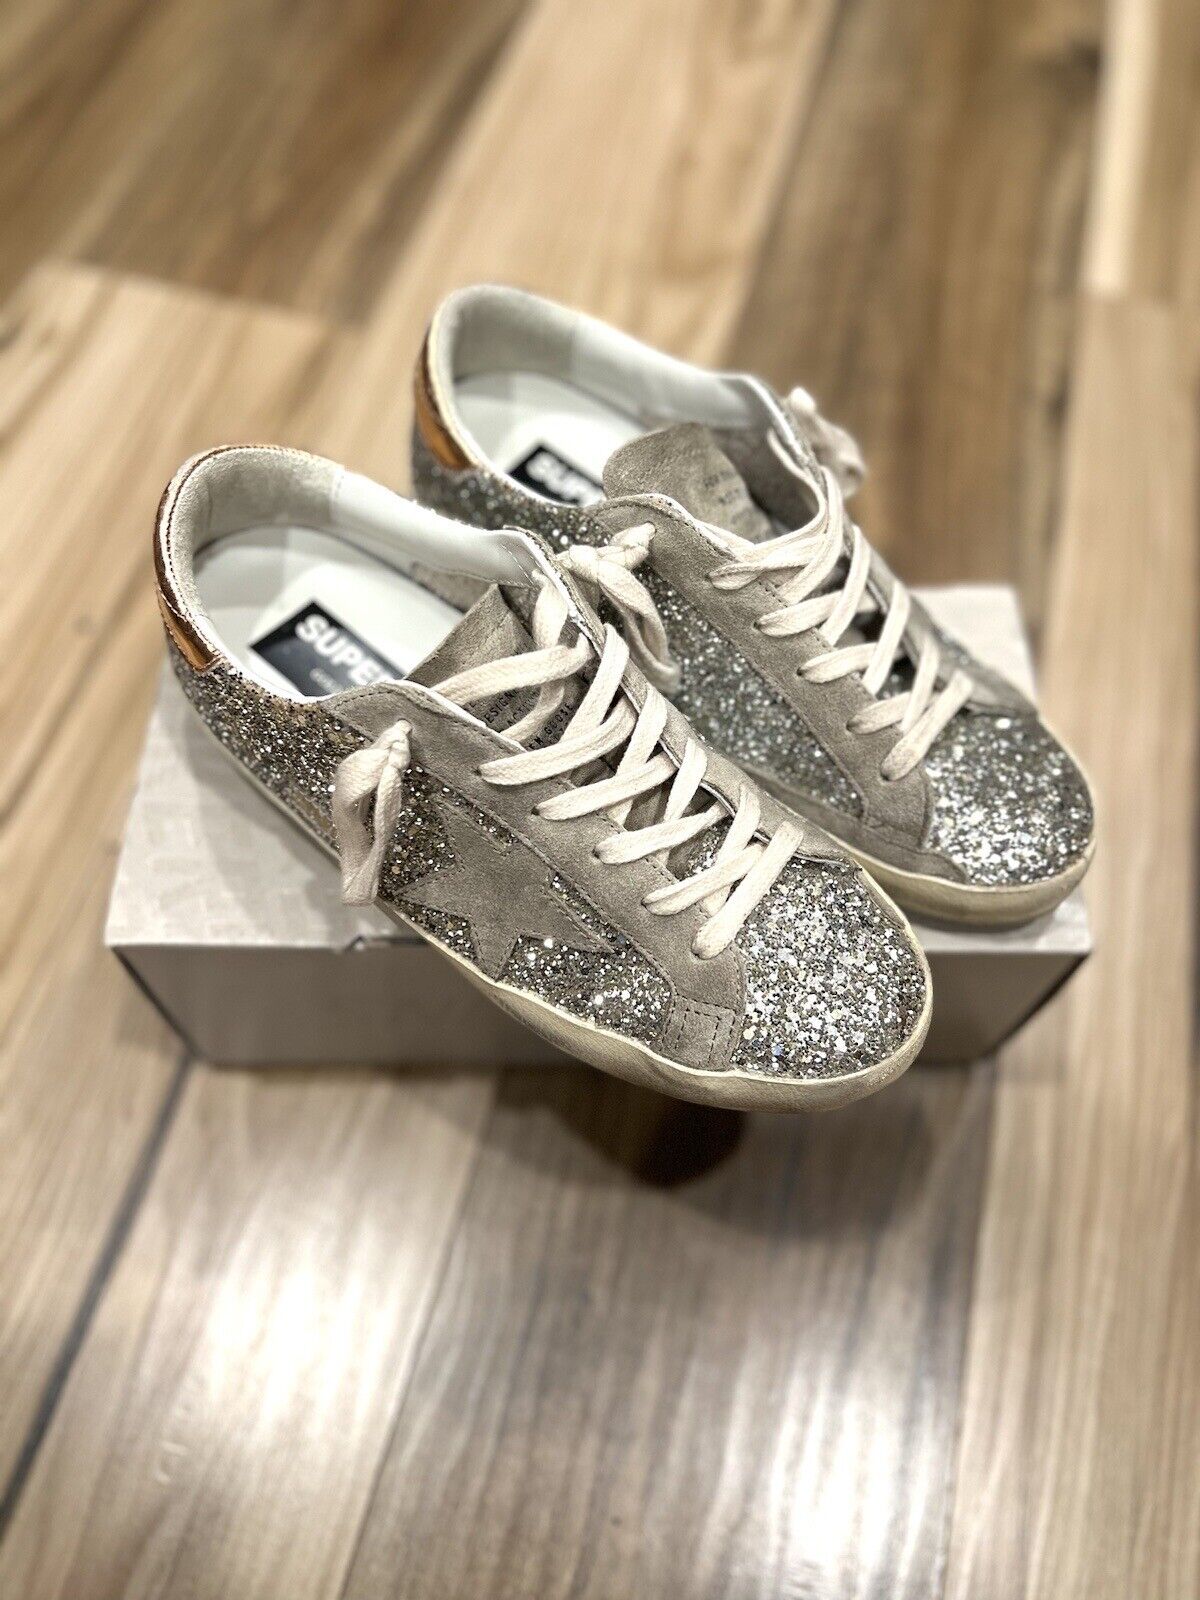 Golden Goose 39 Super-Star in silver glitter with ice-gray suede star | eBay